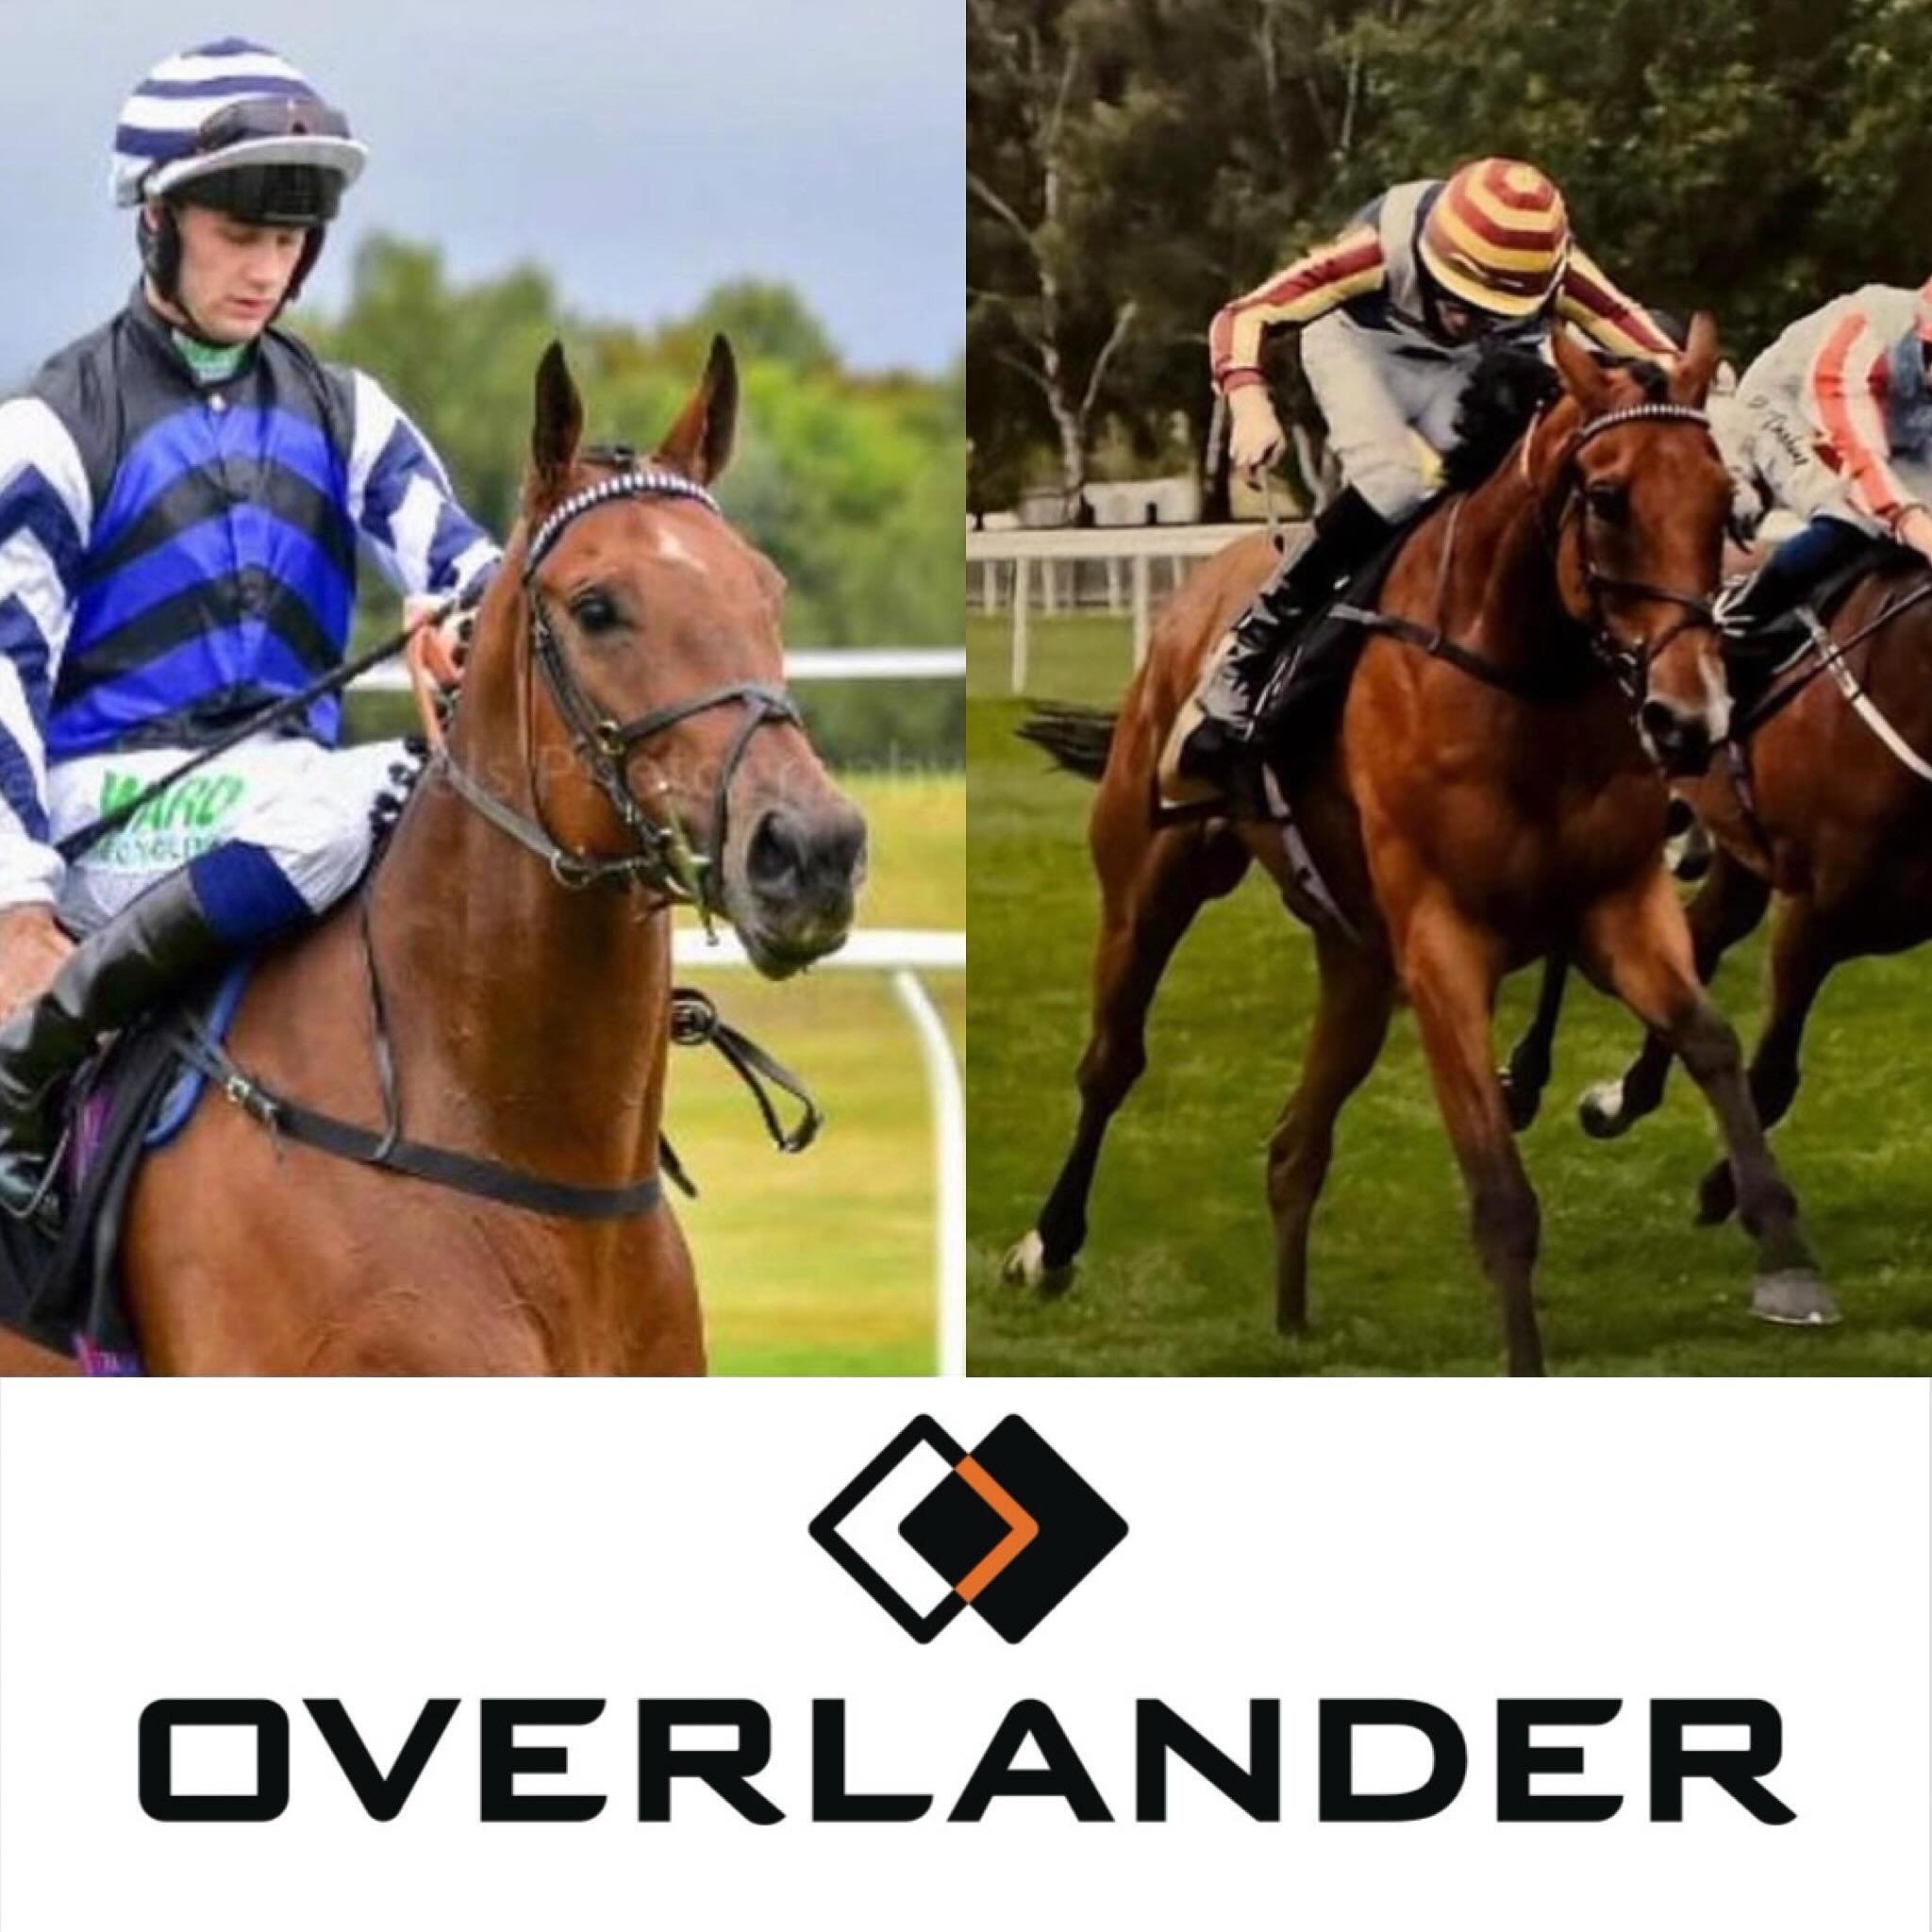 Off to @haydockparkracecourse 

2.10 Sacred Falls lines up for Star Racing 

2.45 Gweedore lines up for @lamont_racing 

Rossa Ryan takes the reins on both today.

Good Luck Everyone
🍀🍀🍀

@overlandervehicles 🚛🚚